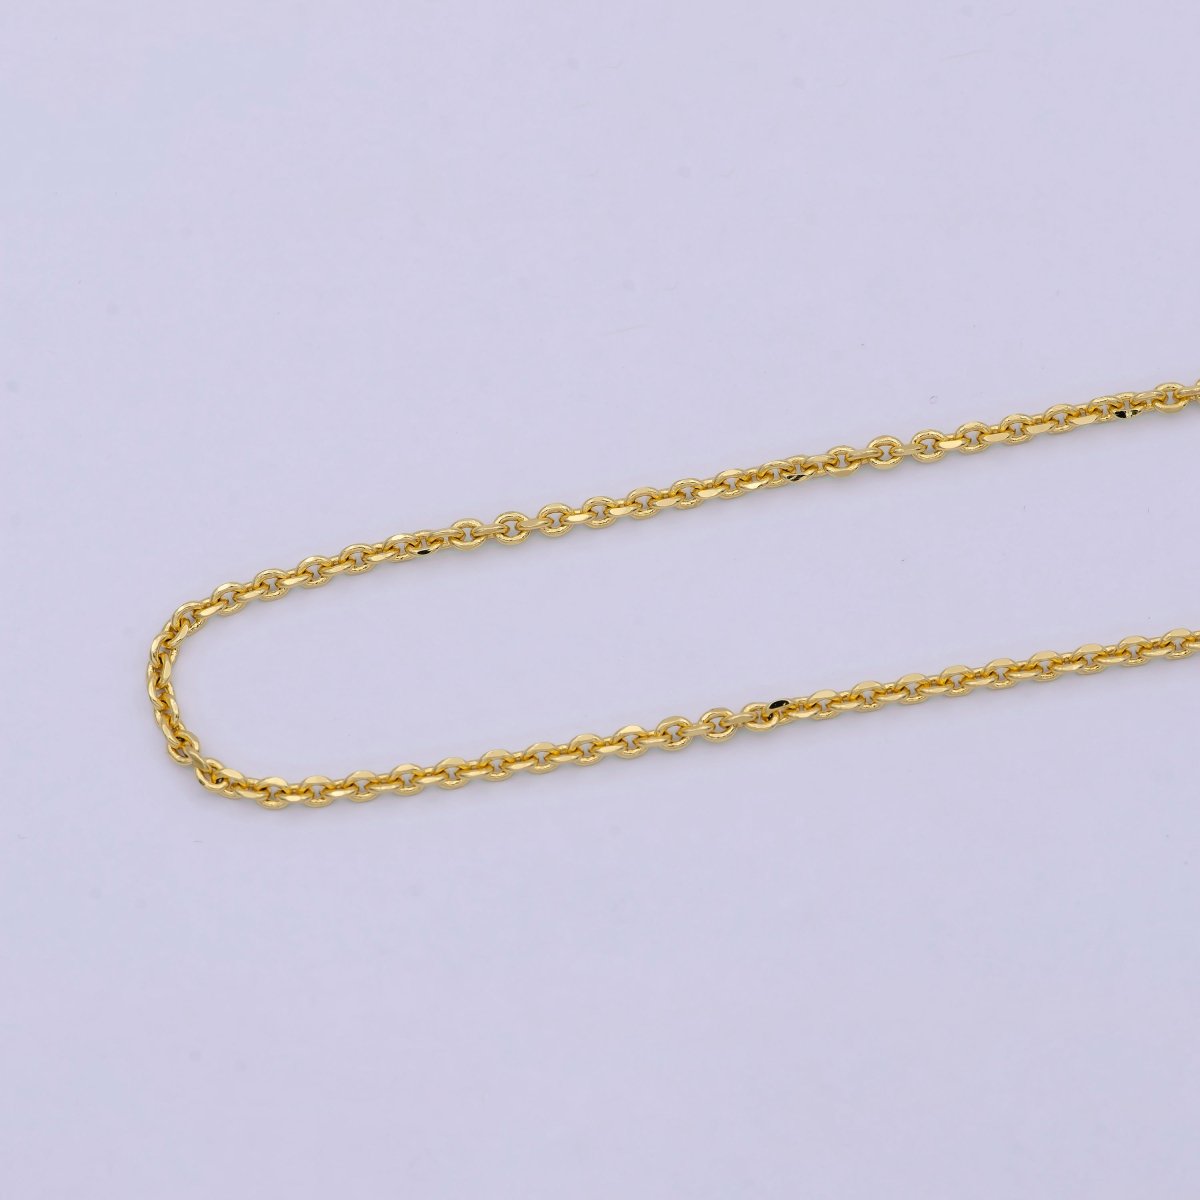 17.7'' Ready to Use 24K Gold Filled Thin Cable Necklace Chain, Layering Cable Chain Dainty Necklace, For Pendant Charm Necklace Making | WA-740 Clearance Pricing - DLUXCA